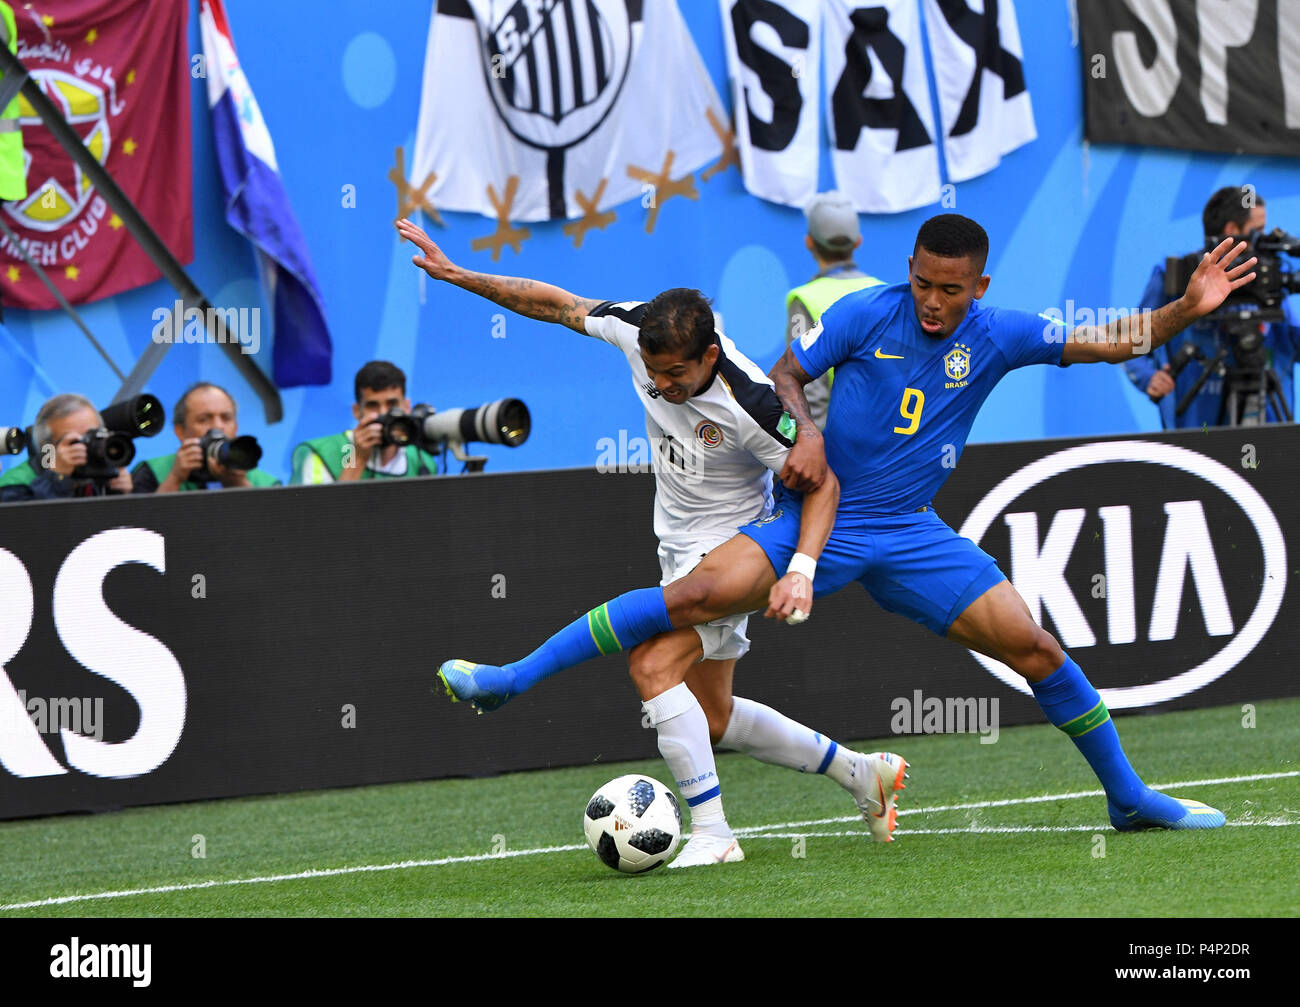 St. Petersburg, Russia. 22nd June, 2018. Russia, St. Petersburg, on June 22, 2018. 2018 FIFA World Cup Russia. The match of the group stage of the FIFA World Cup - 2018 between national teams of Brazil and Costa Rica. In the picture: the player of Brazil Gabriel Zhezus and the player Costa - Ricky Cristian Gamboa. Credit: Andrey Pronin/ZUMA Wire/Alamy Live News Stock Photo